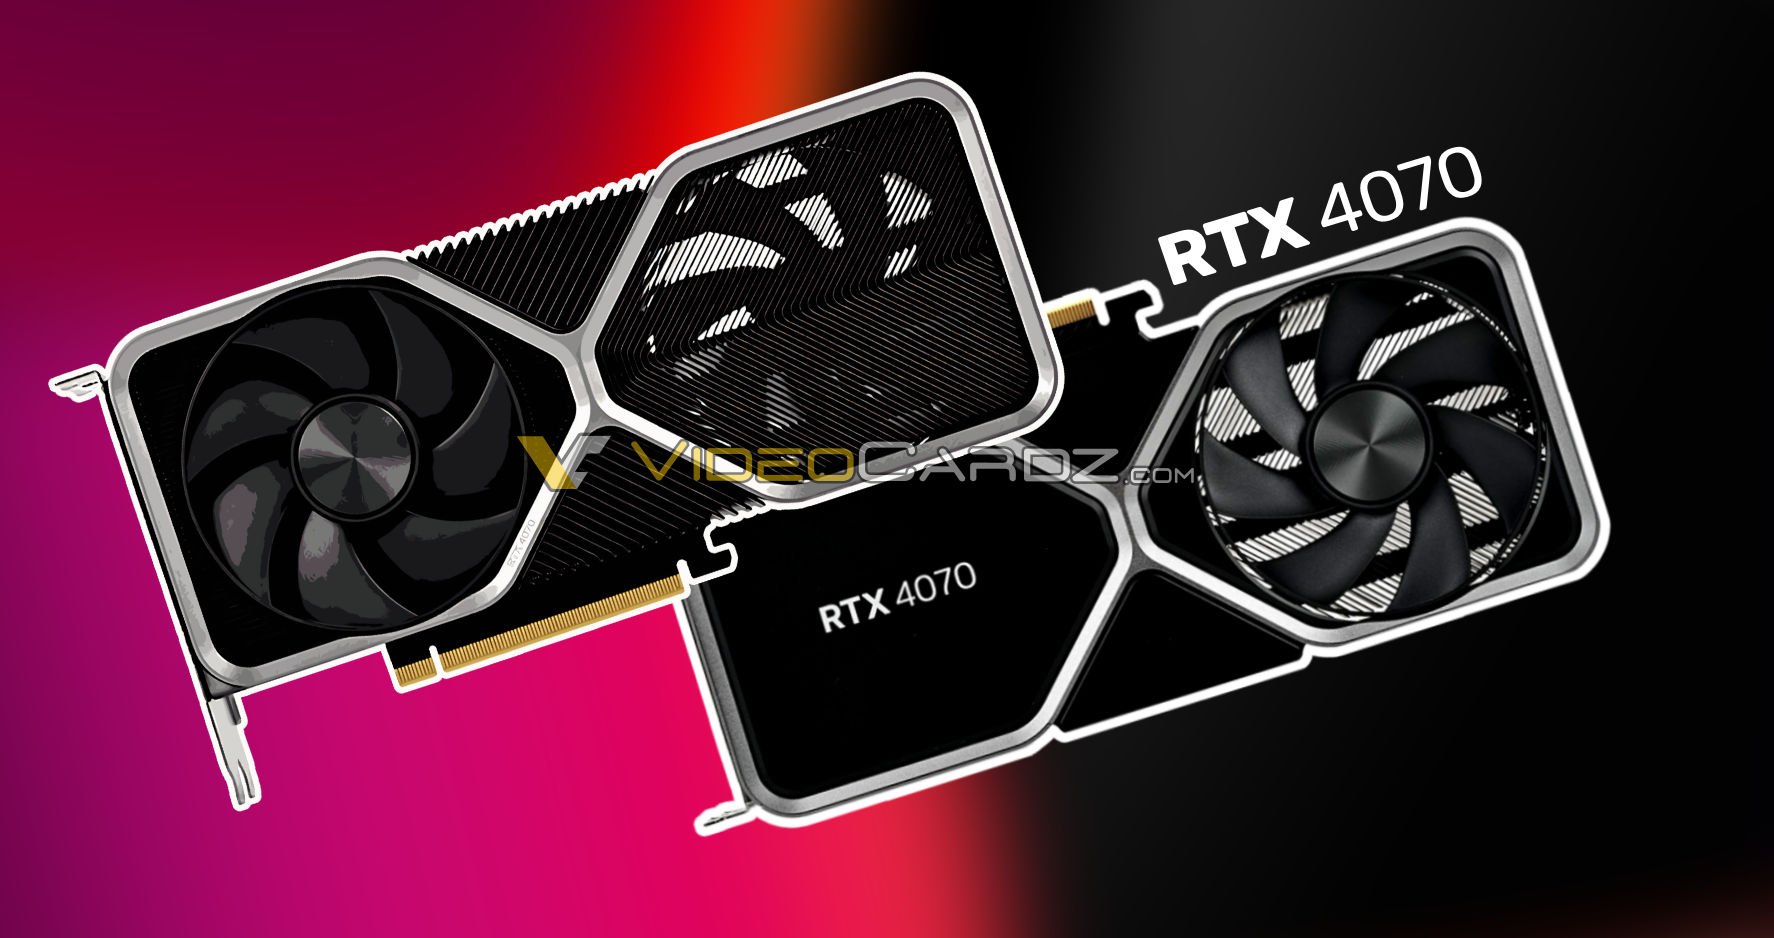 NVIDIA GeForce RTX 4070 Founders Edition GPU pictured